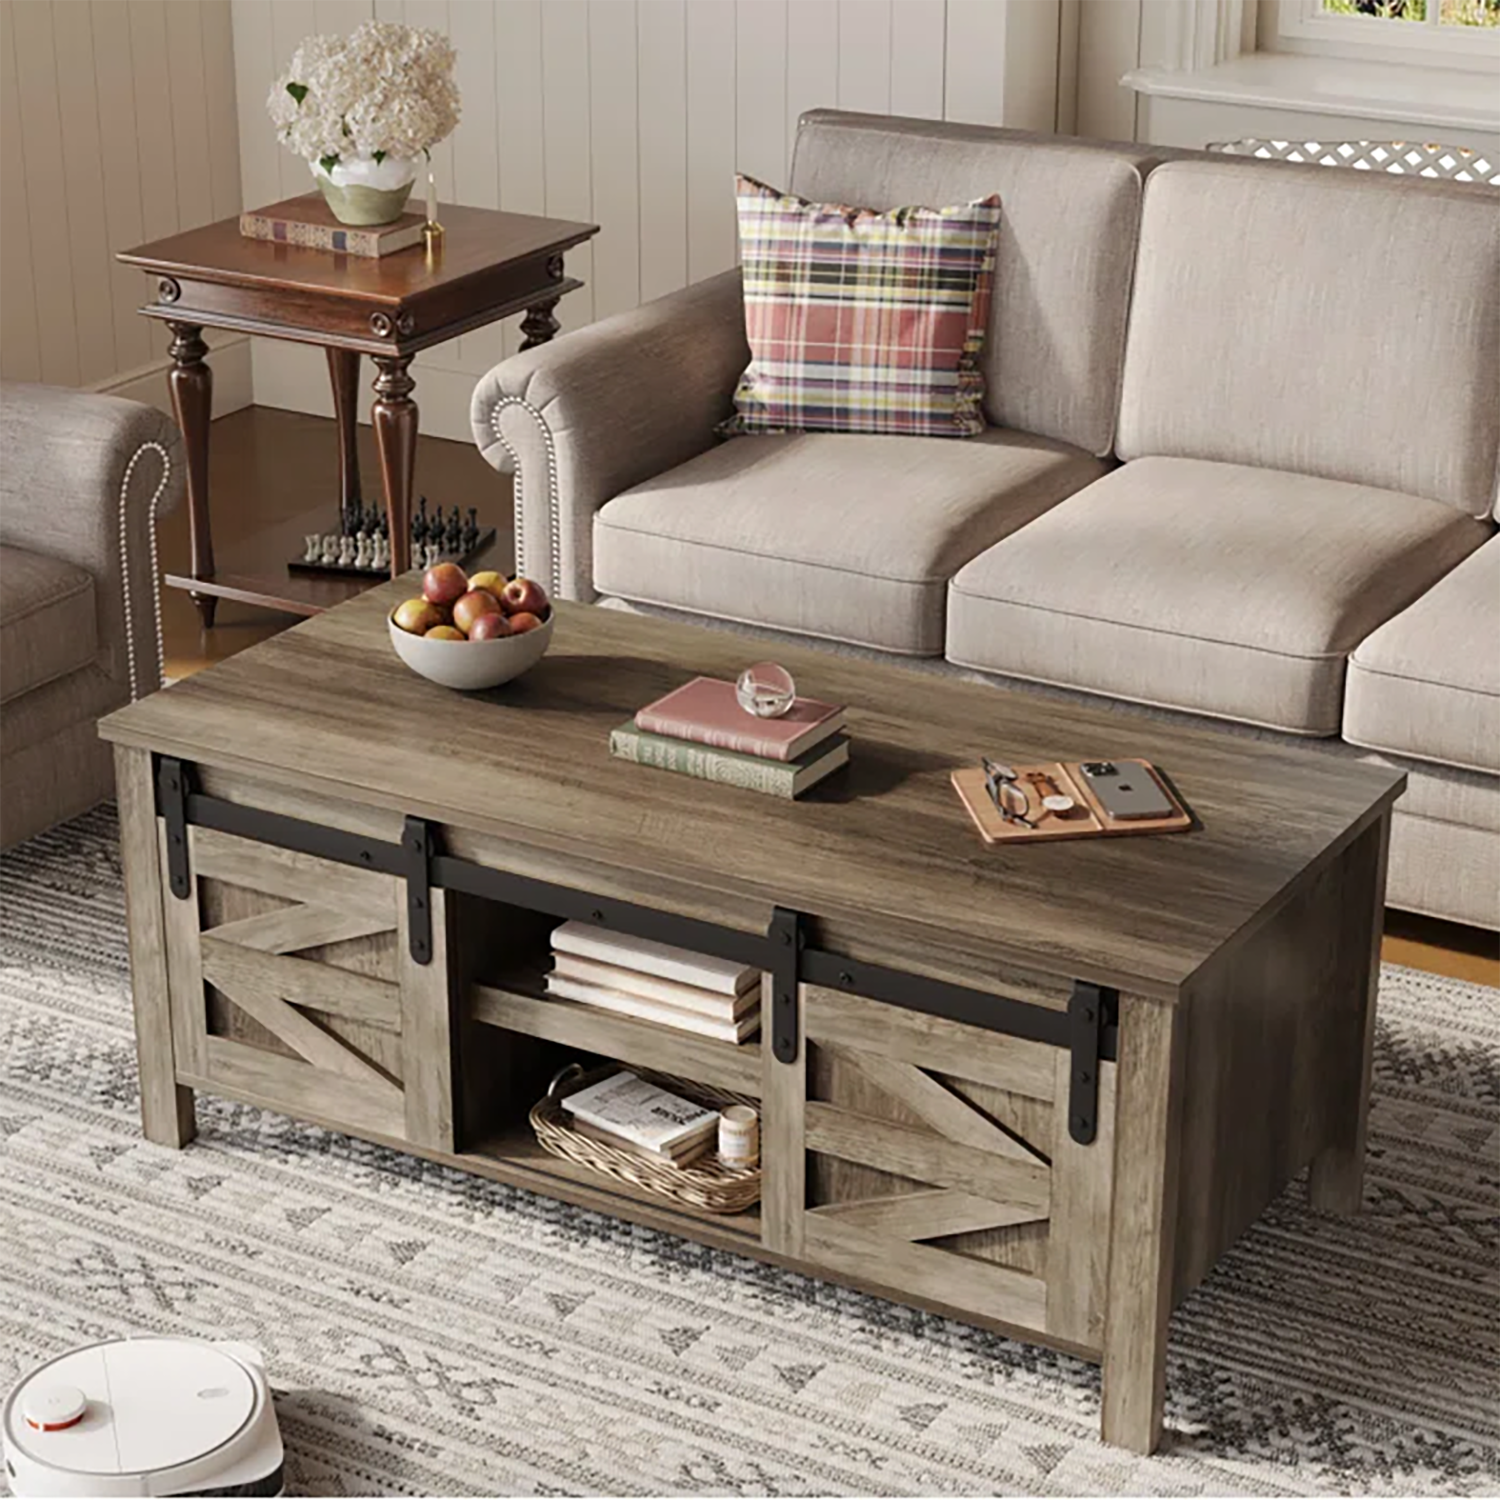 Vineego Wood Farmhouse Coffee Table With Storage In The Coffee Tables  Department At Lowes Intended For Coffee Tables With Storage And Barn Doors (View 11 of 15)